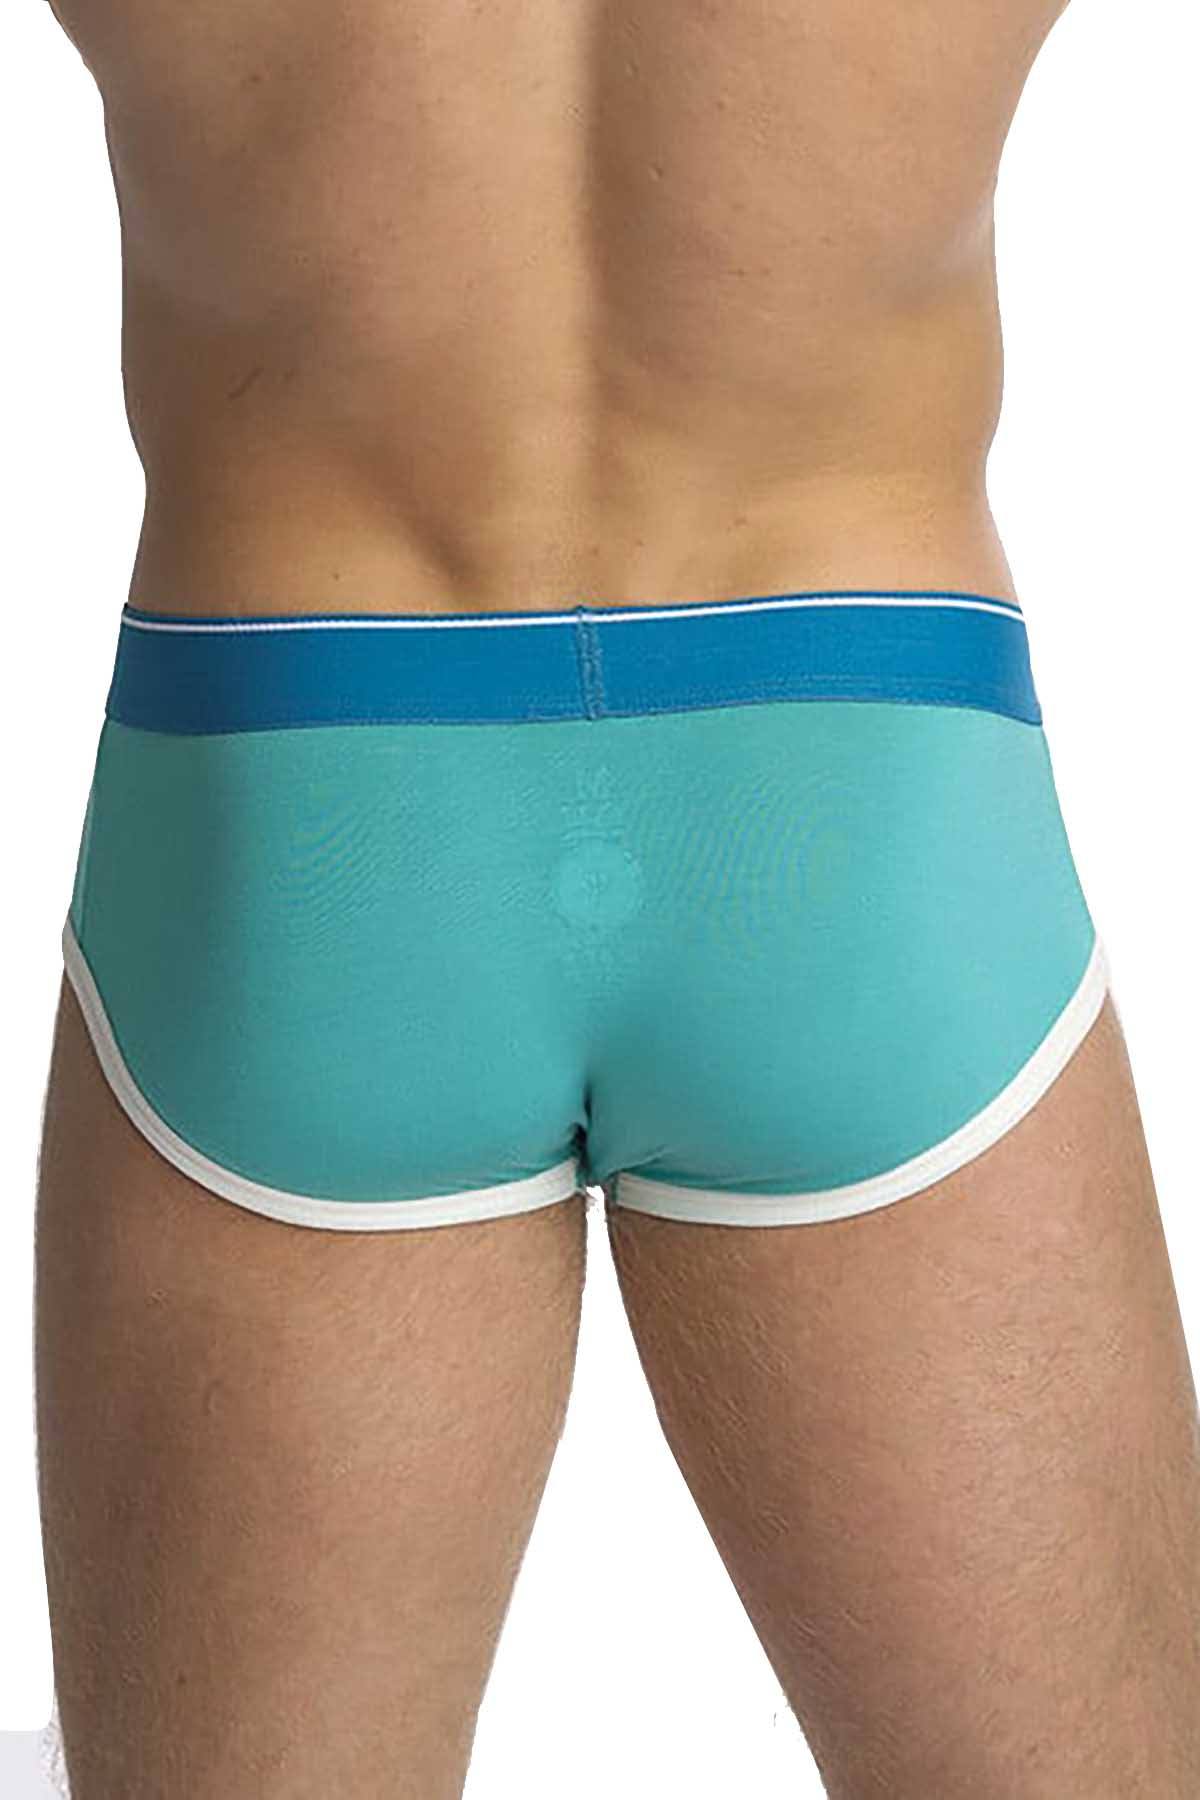 Piado Turquoise/Teal Nevis Brief